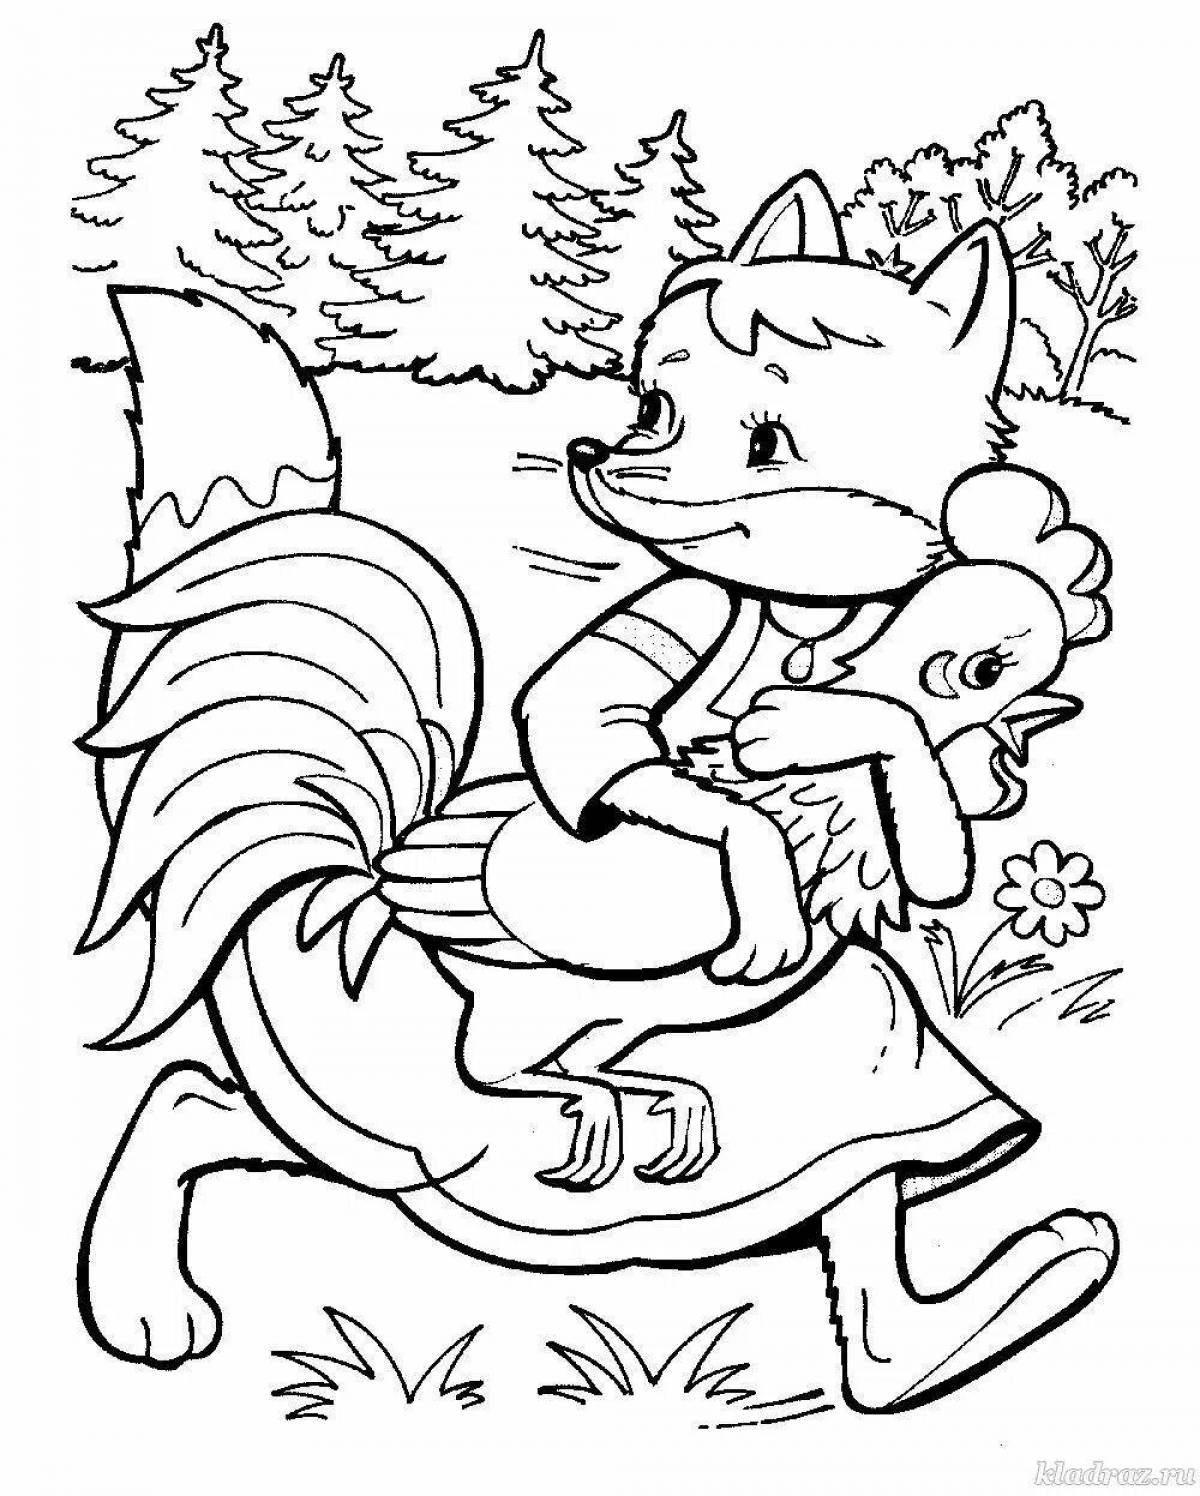 Fantastic coloring tale of the cat and the fox